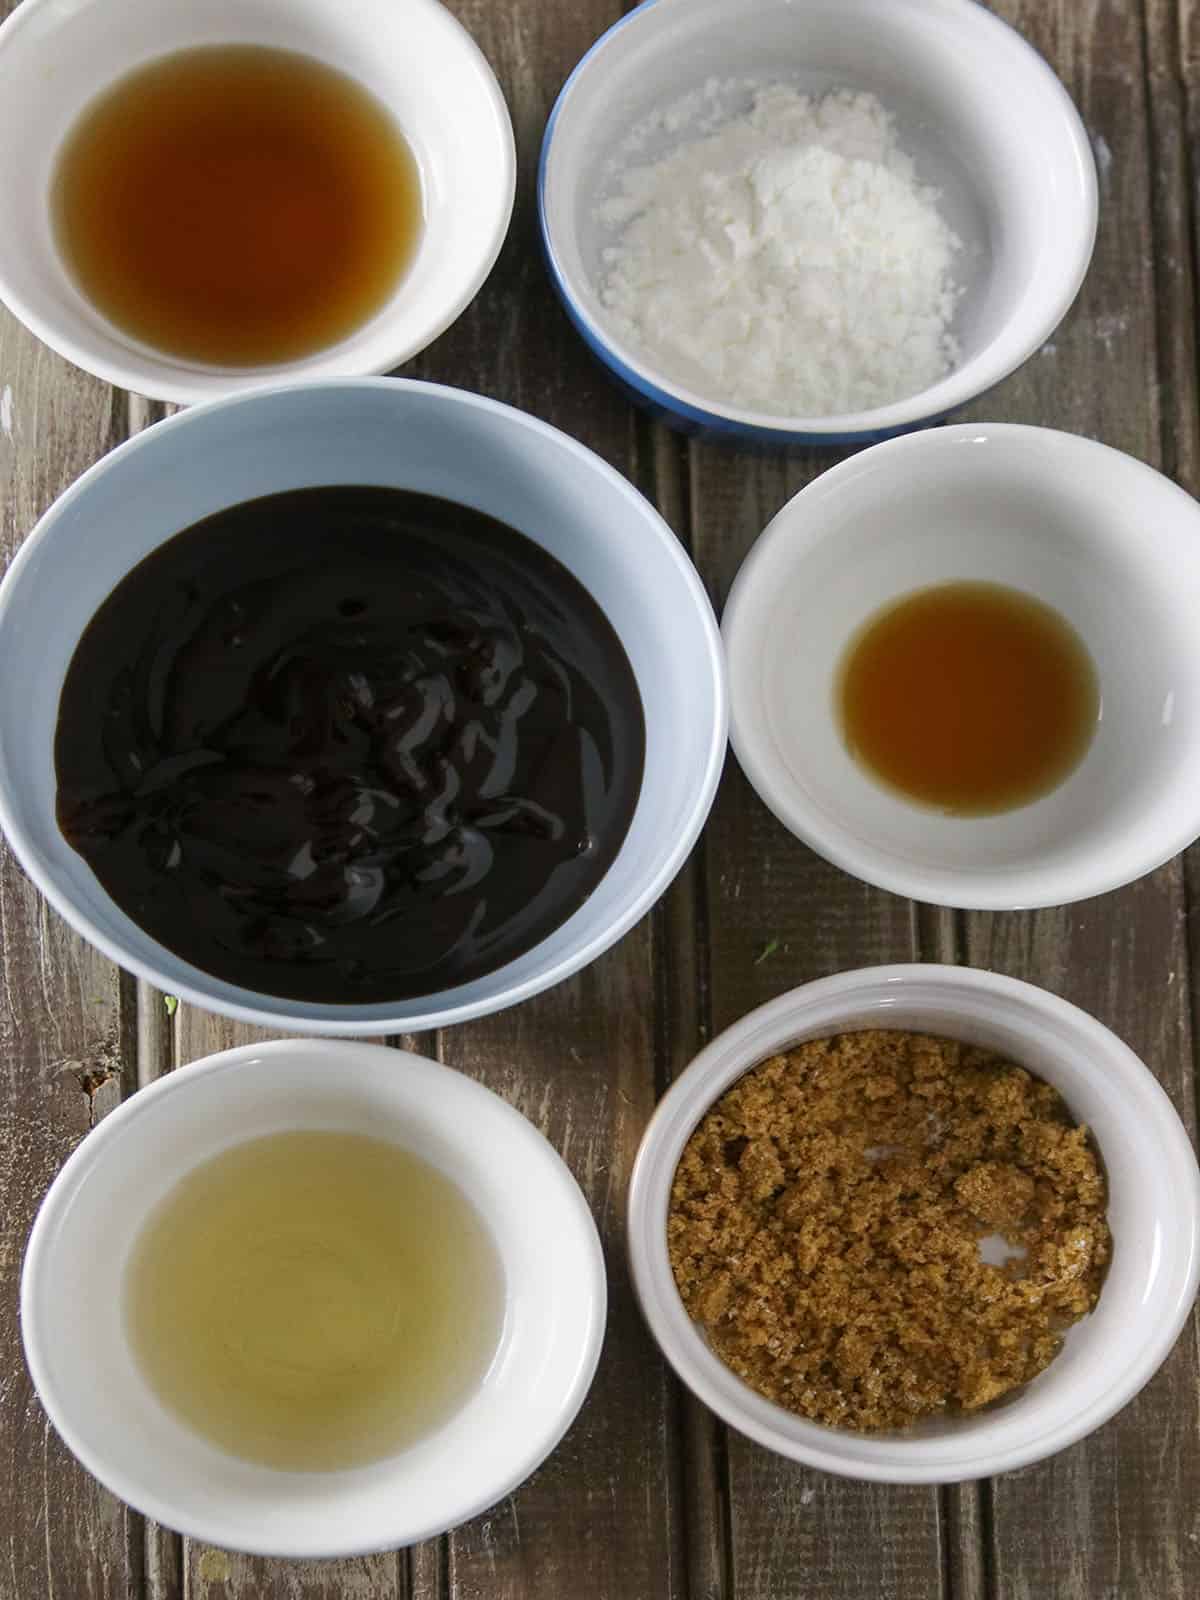 soy sauce, sesame oil, oyster sauce, cornstarch, rice vinegar, Chinese cooking wine in white small bowls